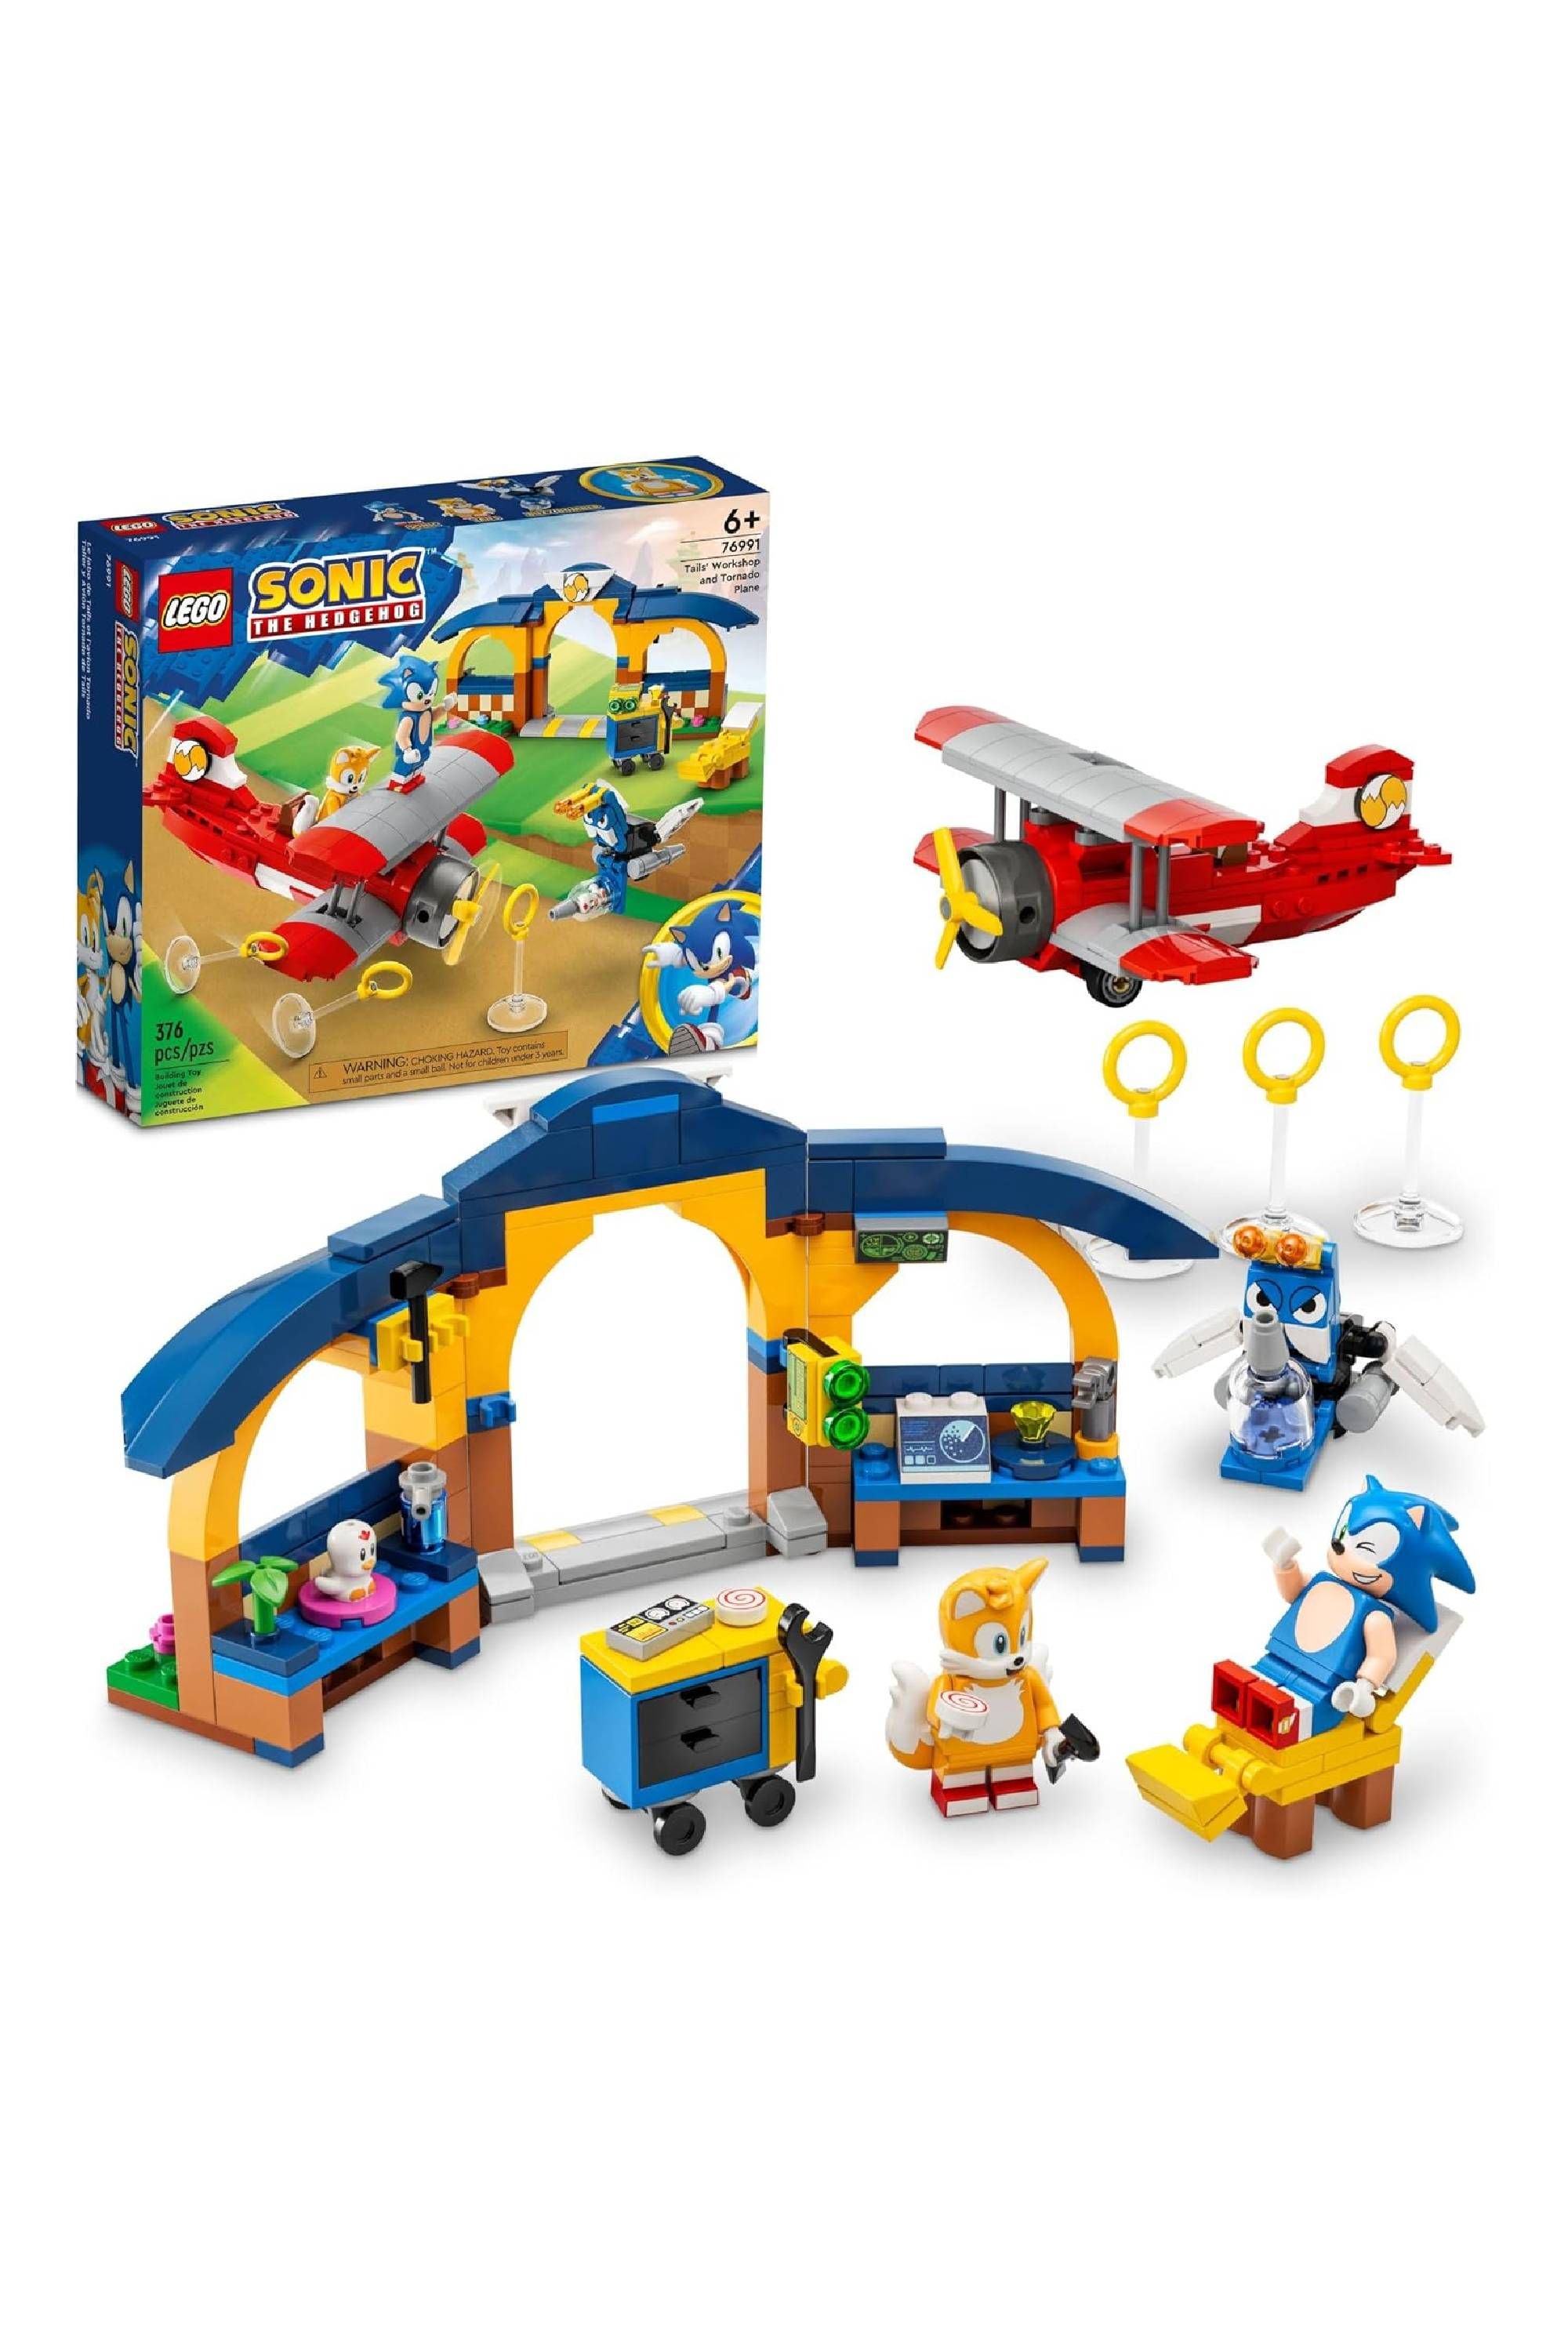 Is the Sonic the Hedgehog Lego Expansion Set Worth the Hype? An In-Depth  Review and Comparison – 21331